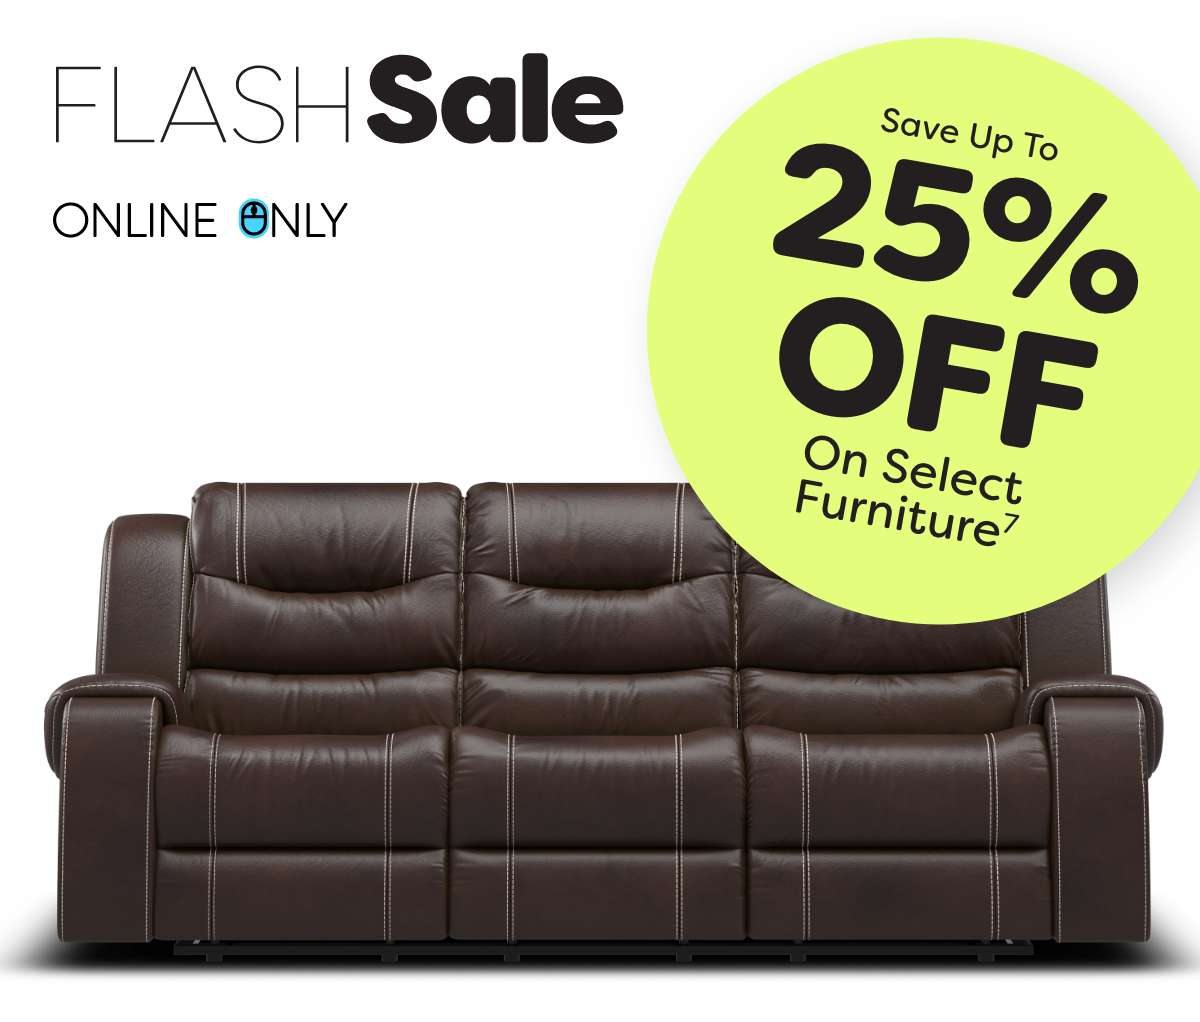 Save up to 25% off on select furniture